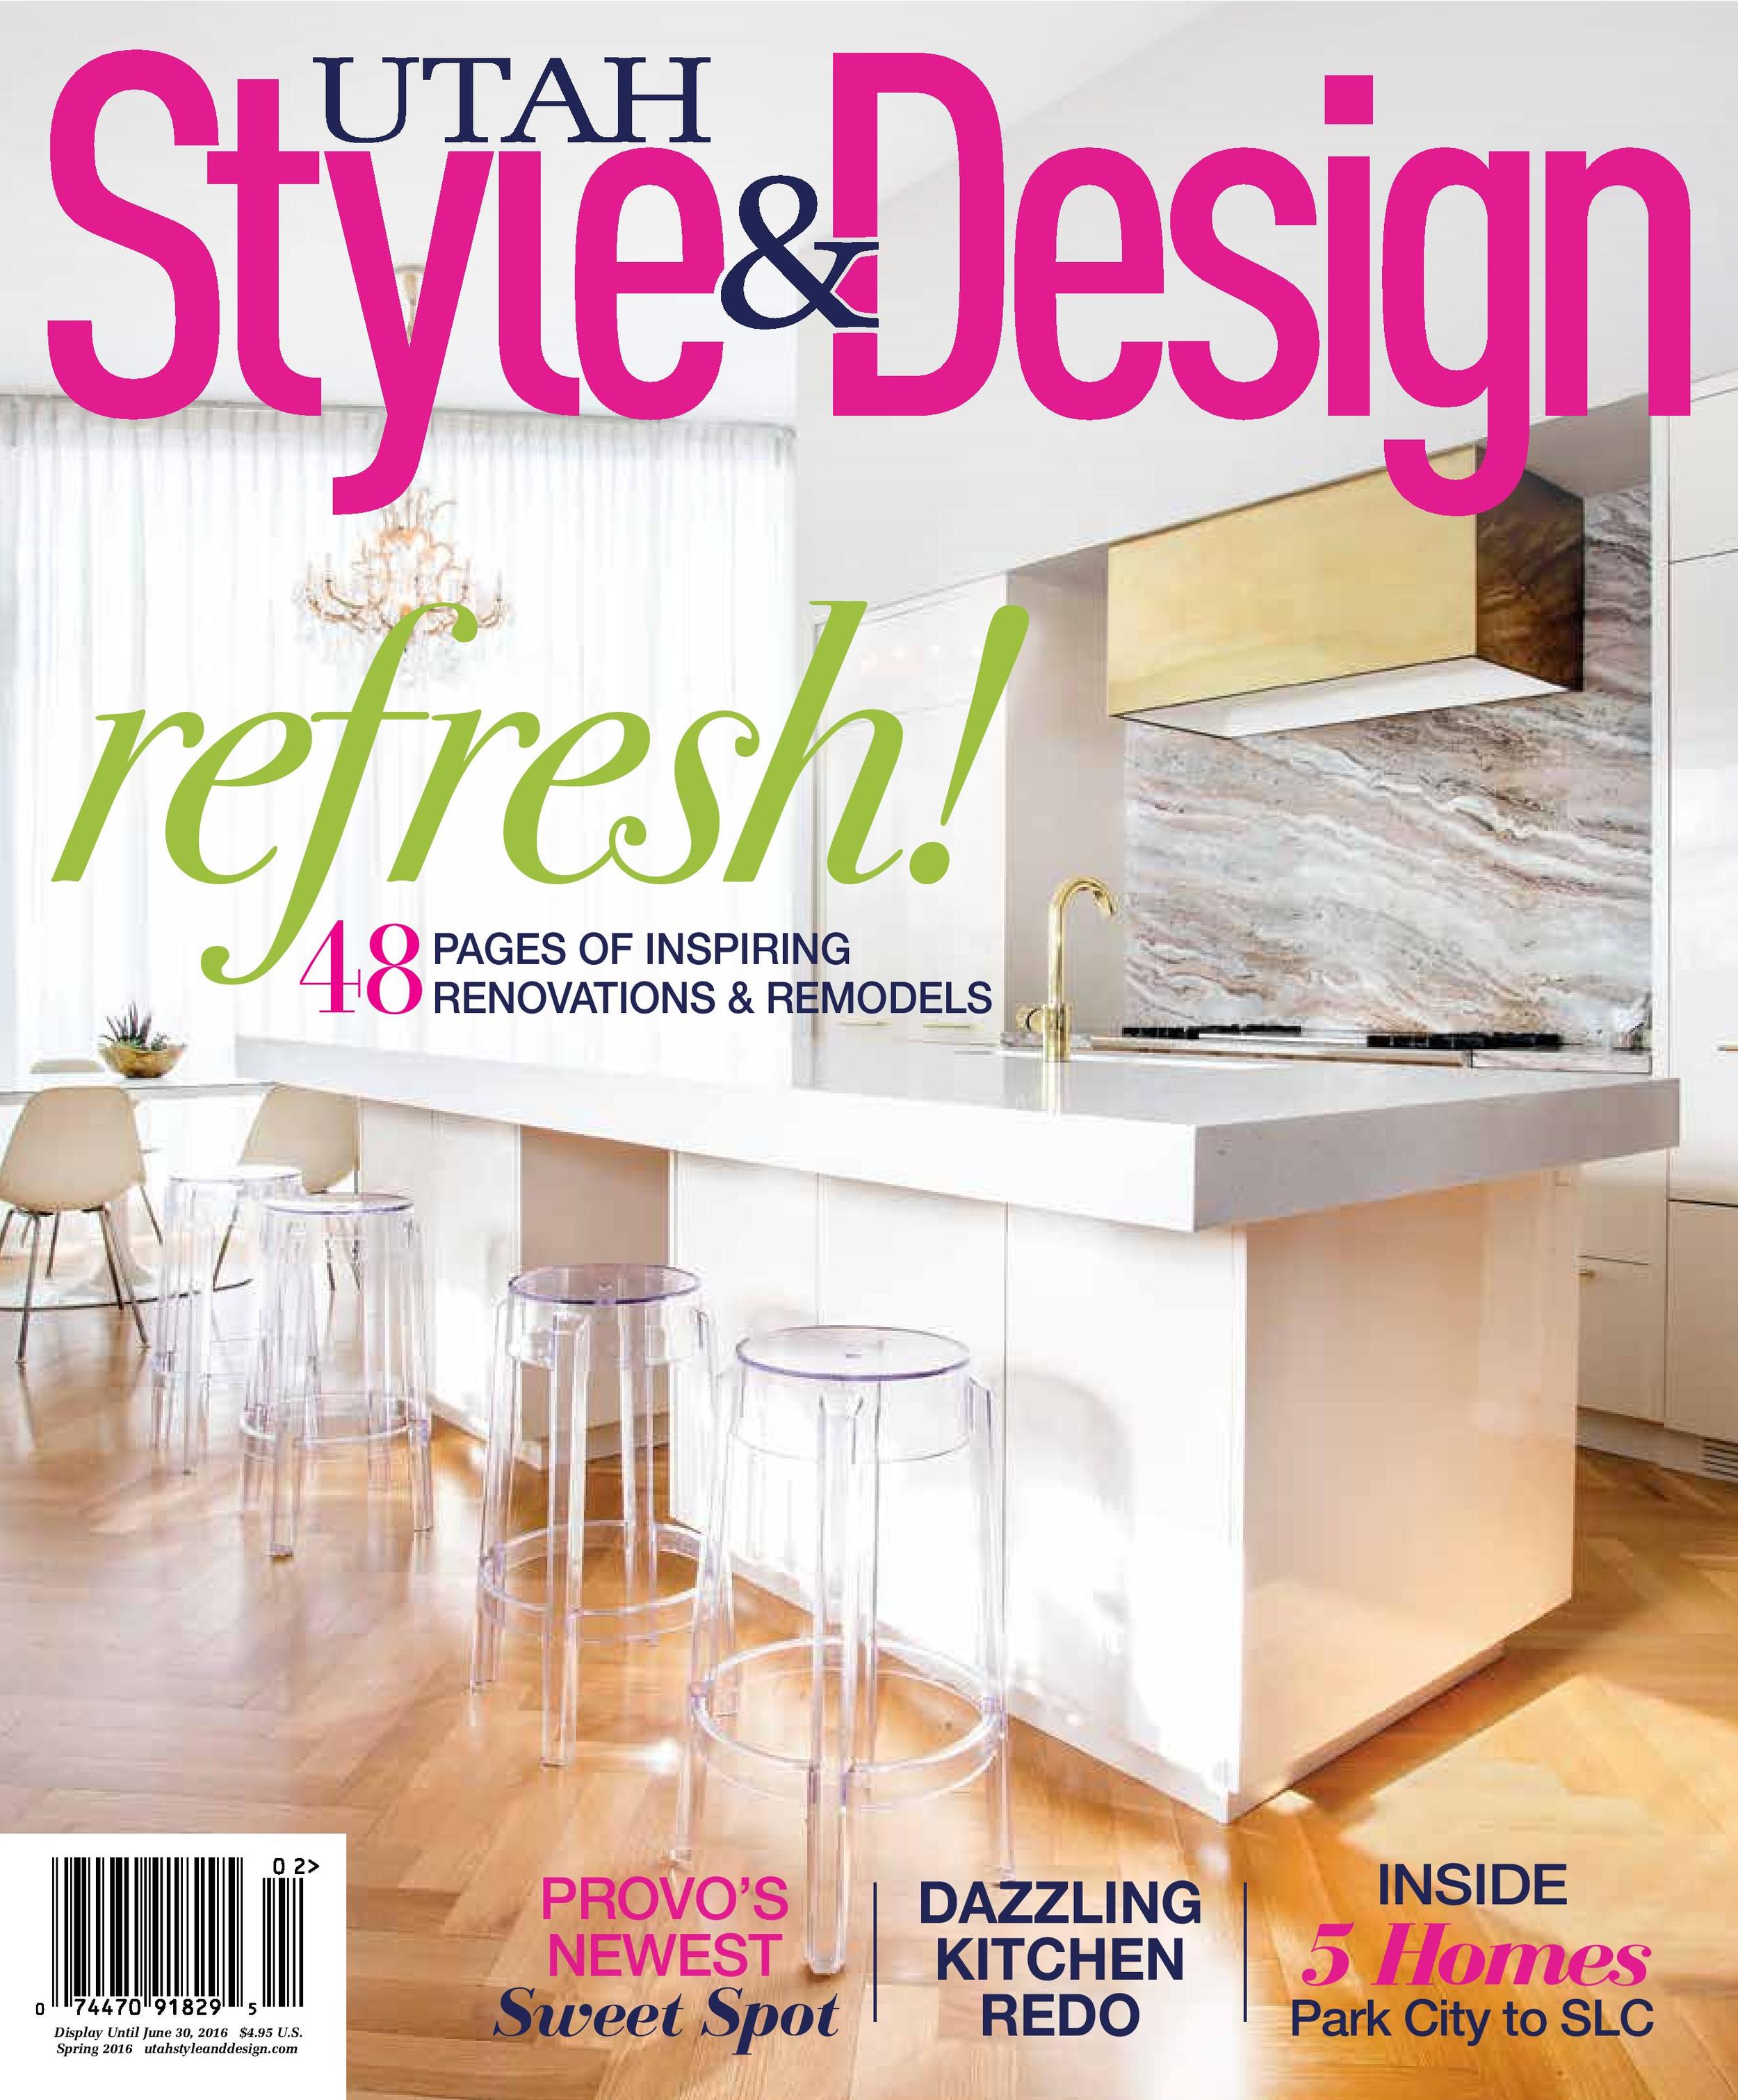 Style is Served - Utah Style and Design